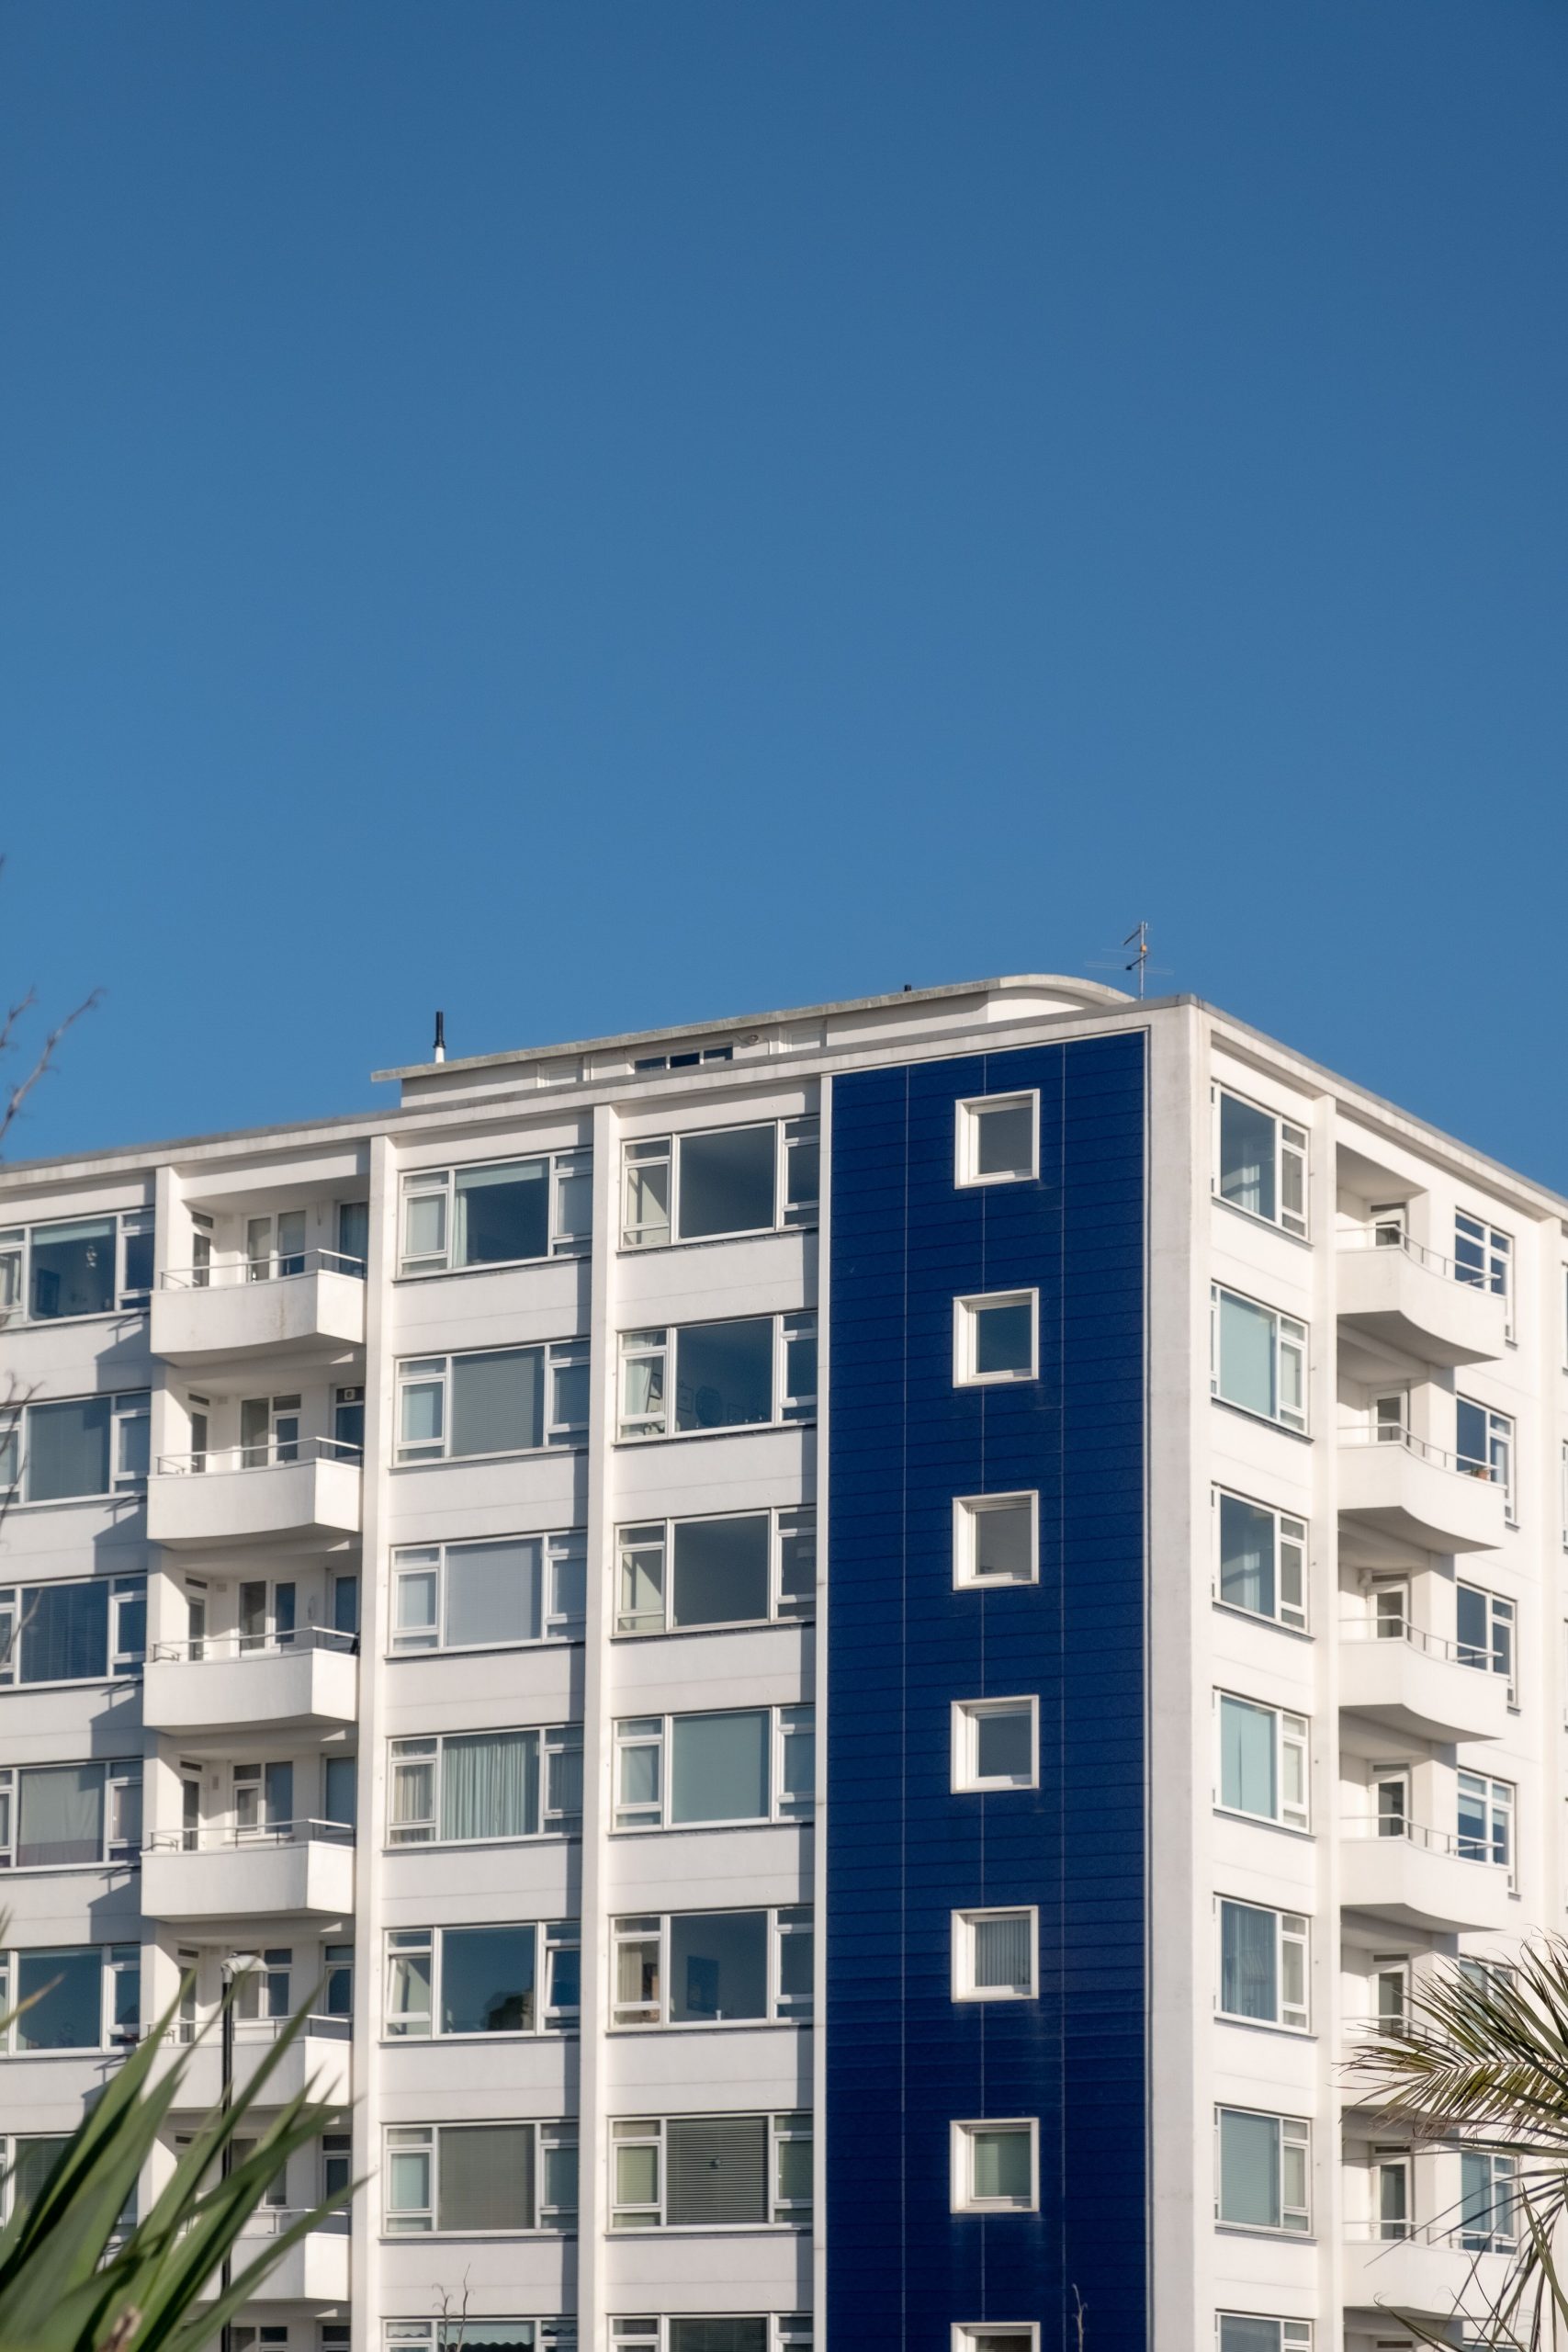 Block of flats with blue sky: Eastbourne